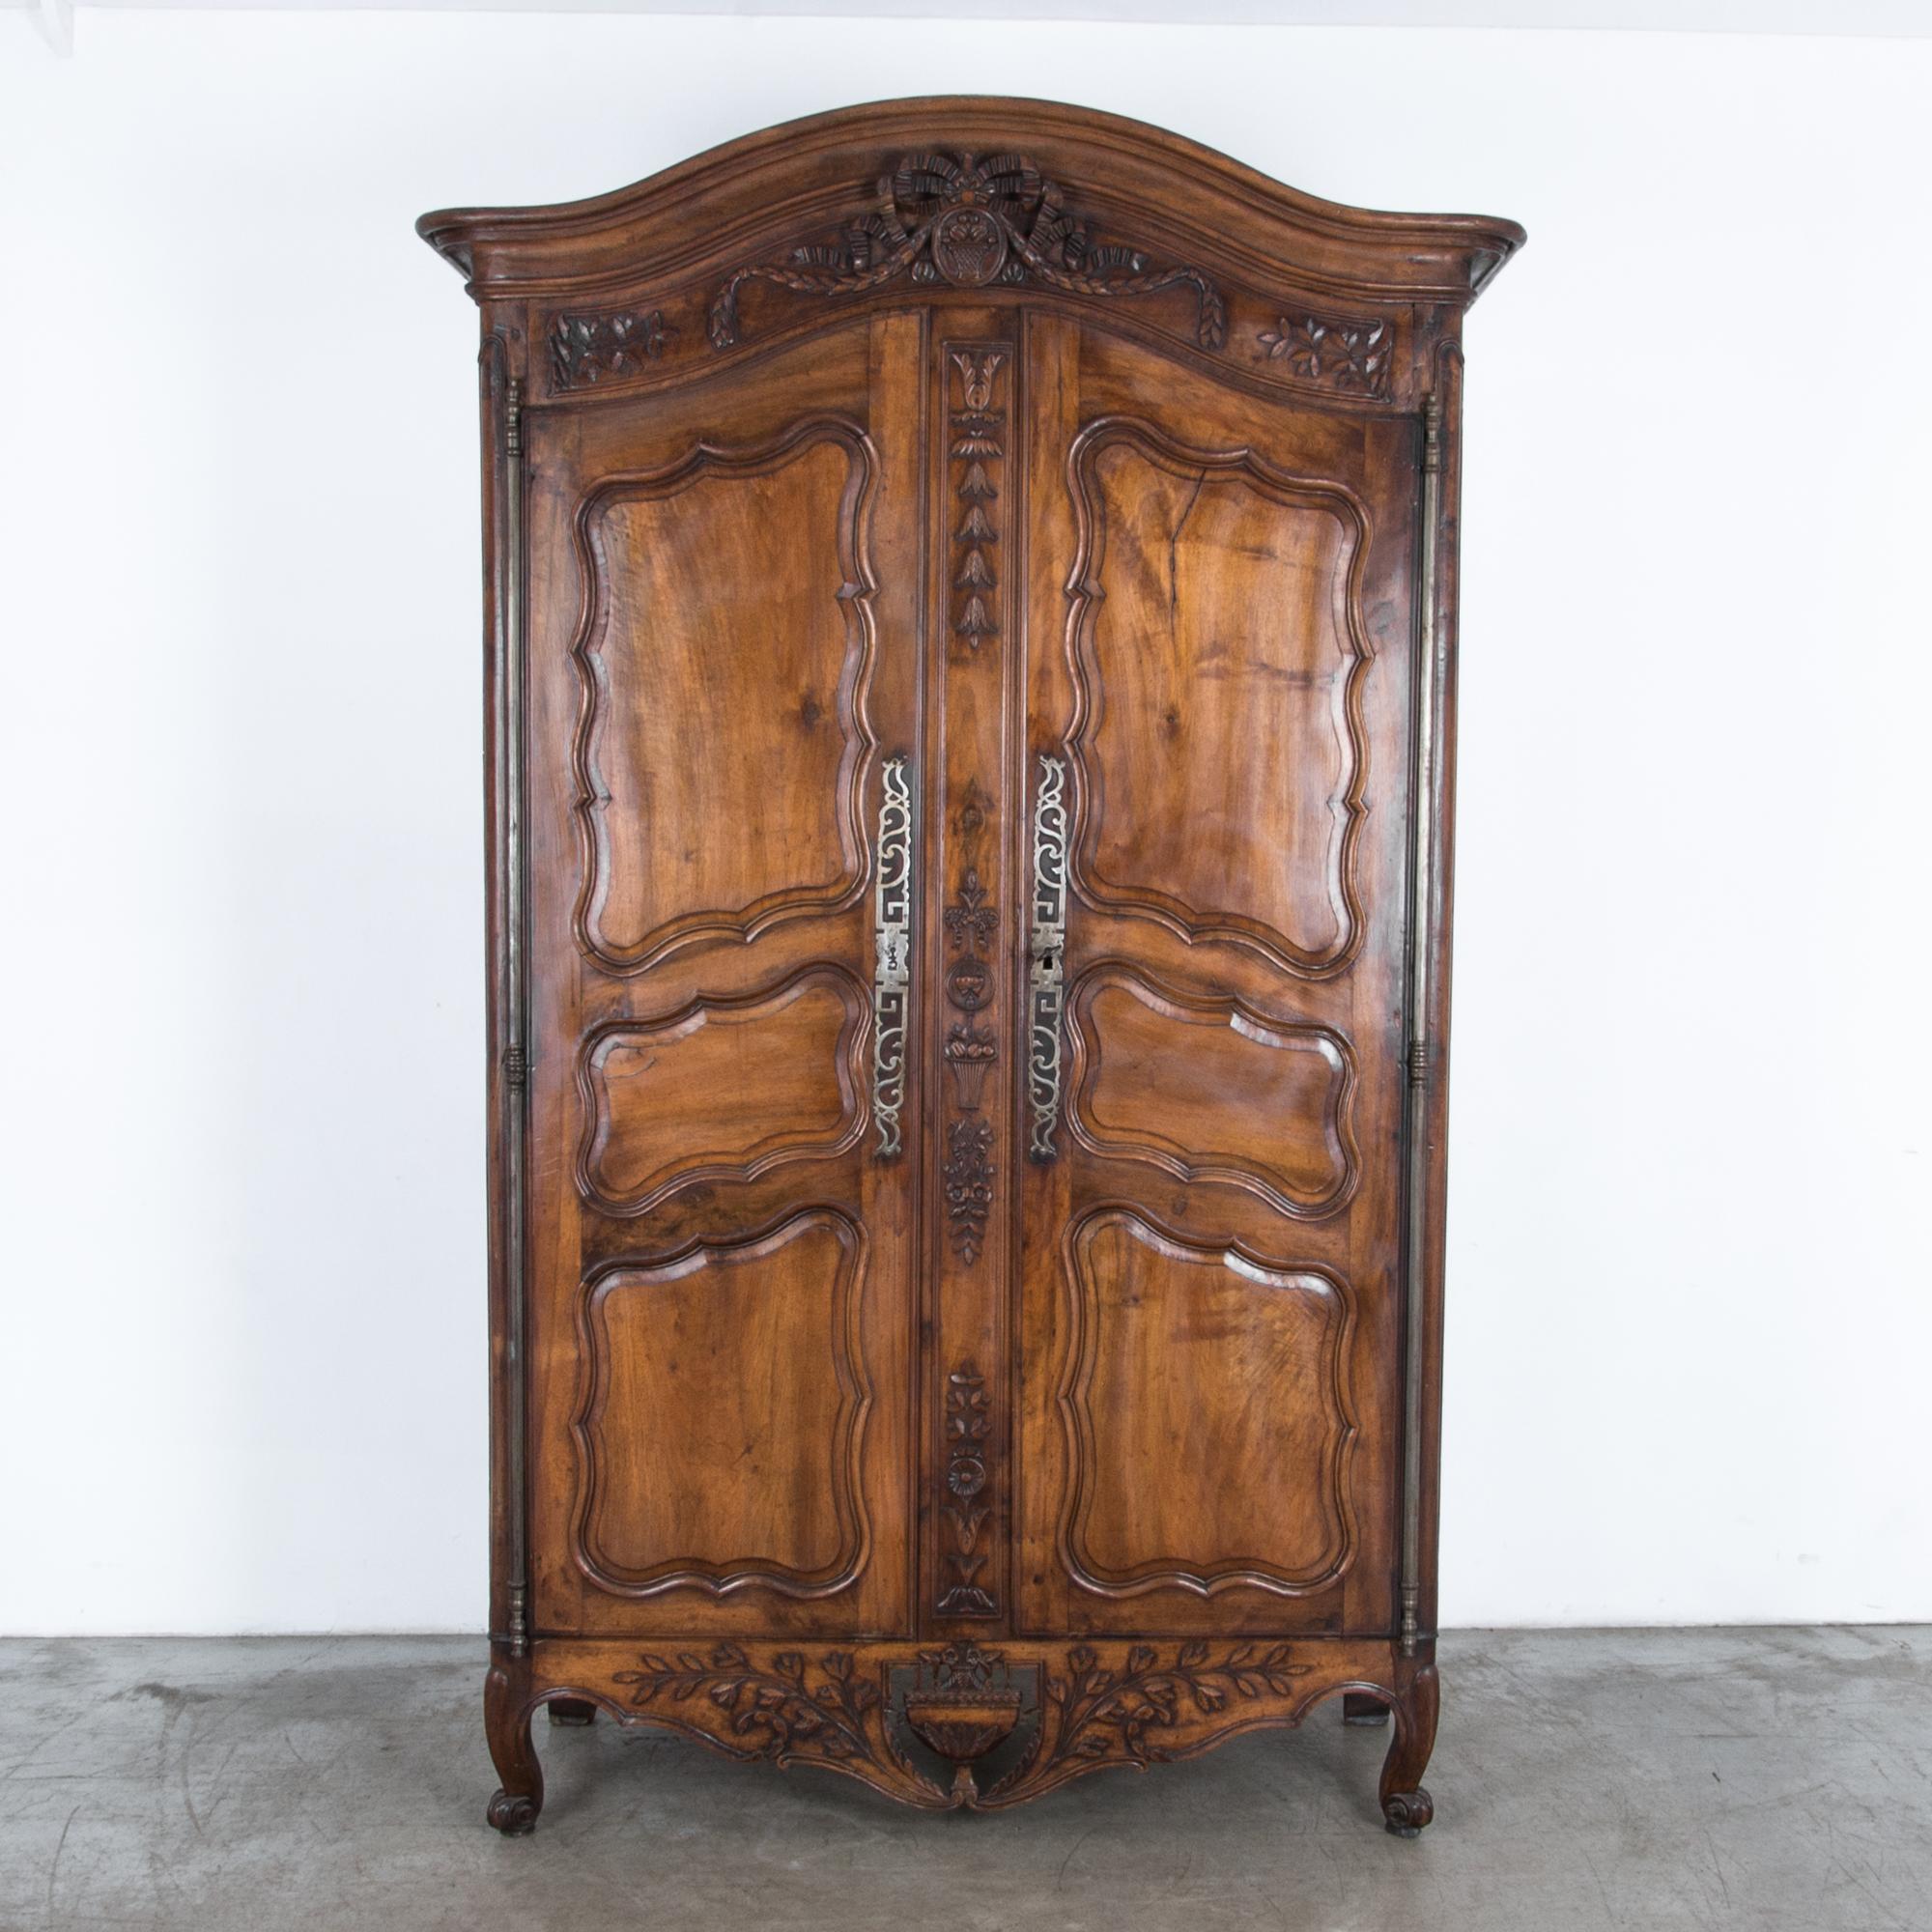 Embellished with original iron hardware and distinctive twin hearts decoration, this elaborately carved wardrobe comes from late 18th century, France. Embellishments recall the local landscape, an ample inspiration for provincial French decorators,